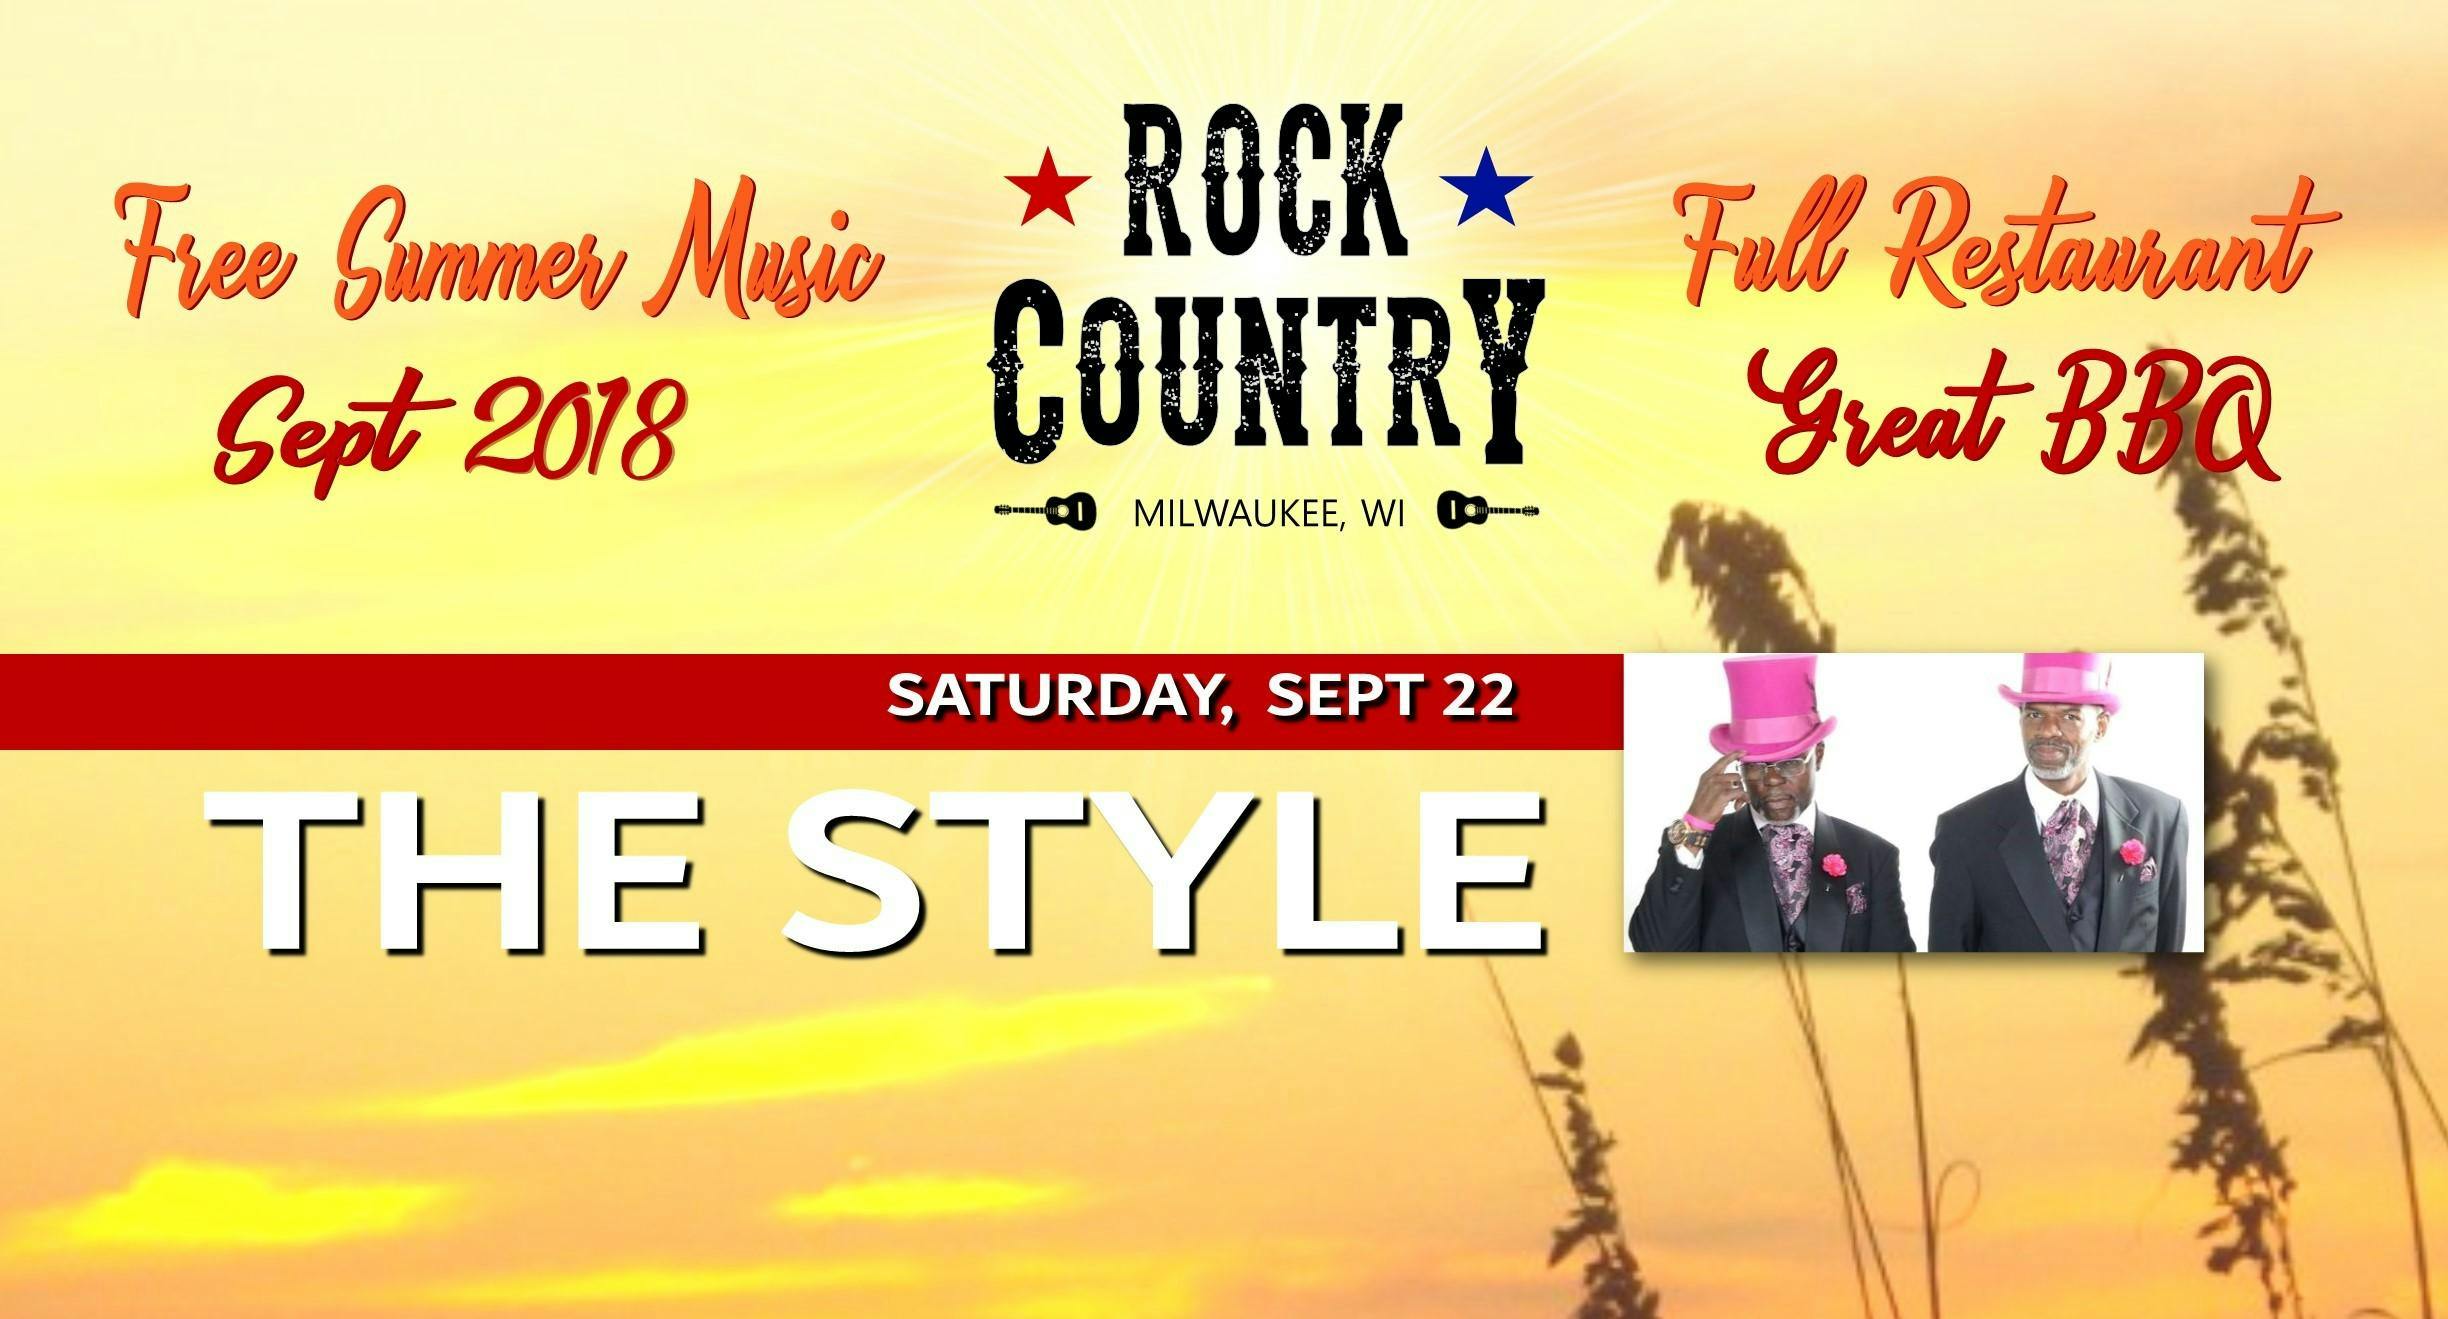  The Style - Main Floor Dance Party at Rock Country!